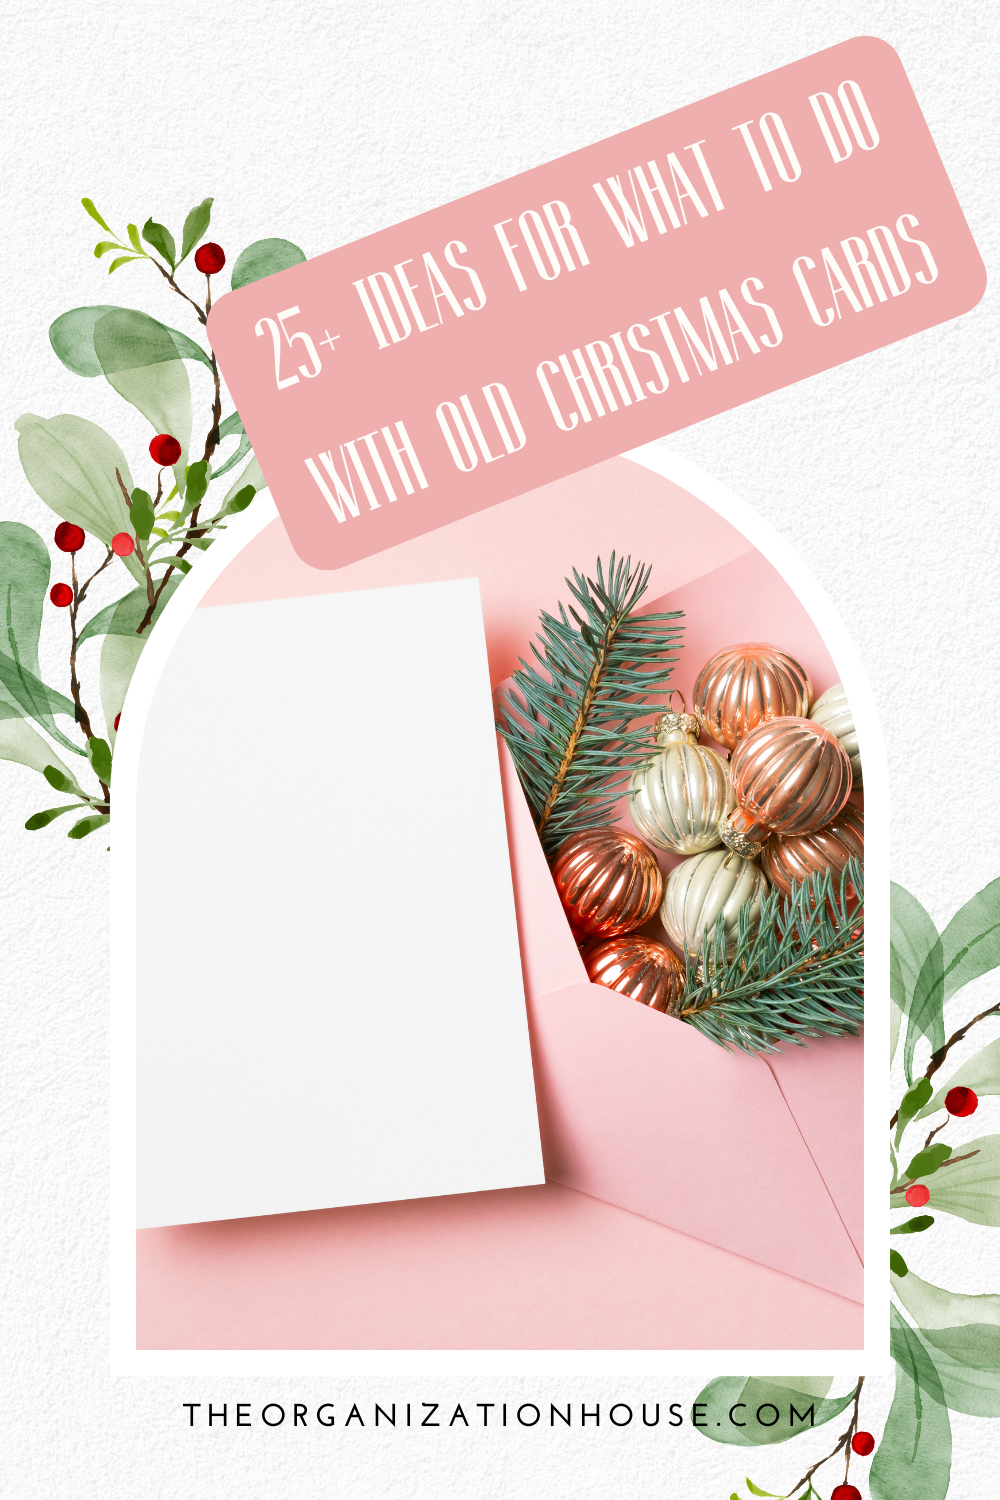 25+ Ideas for What to Do With Old Christmas Cards